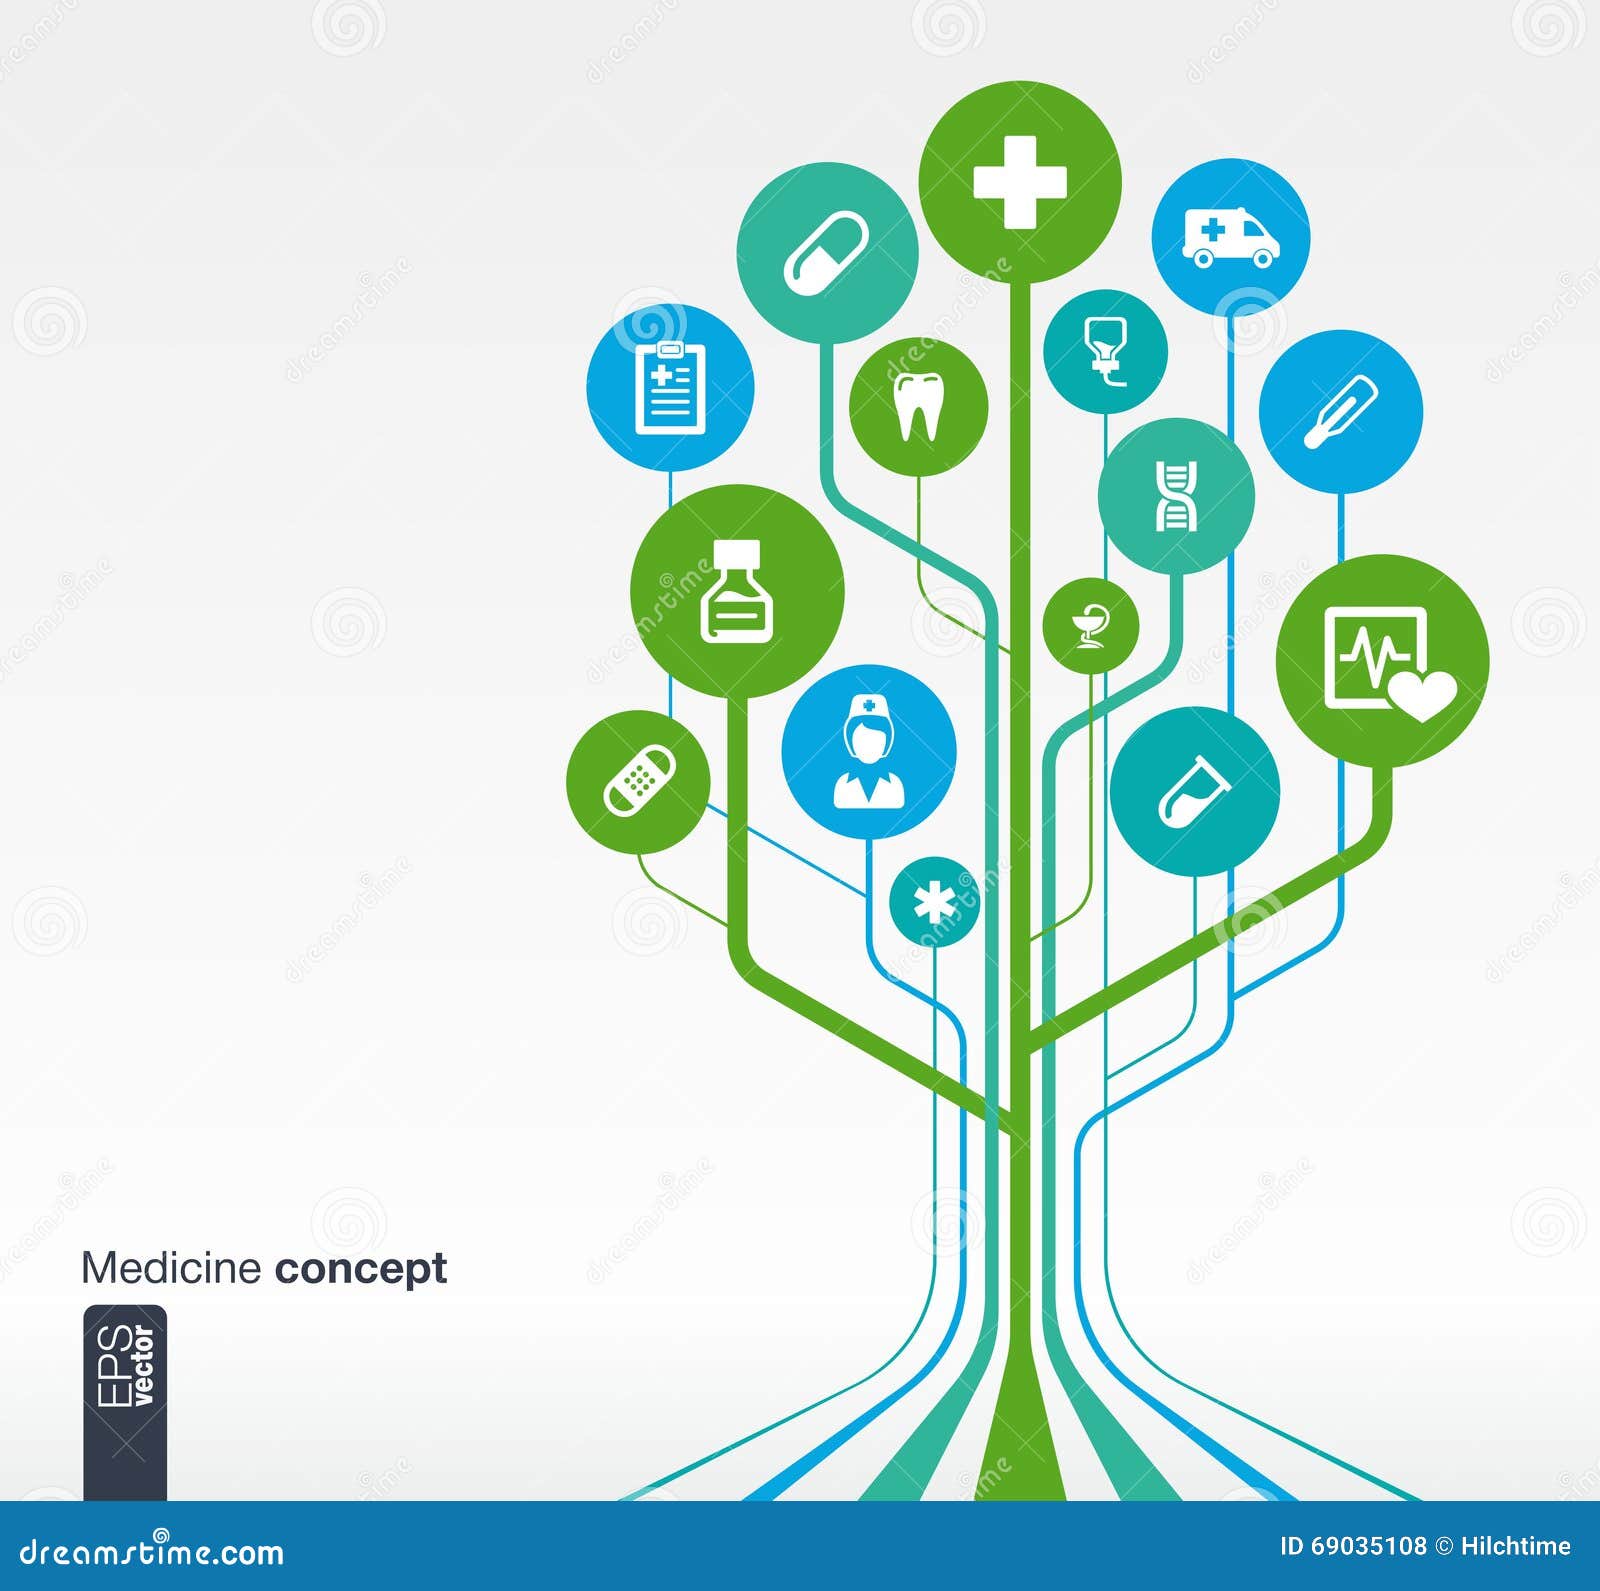 growth tree medical, health, healthcare concept